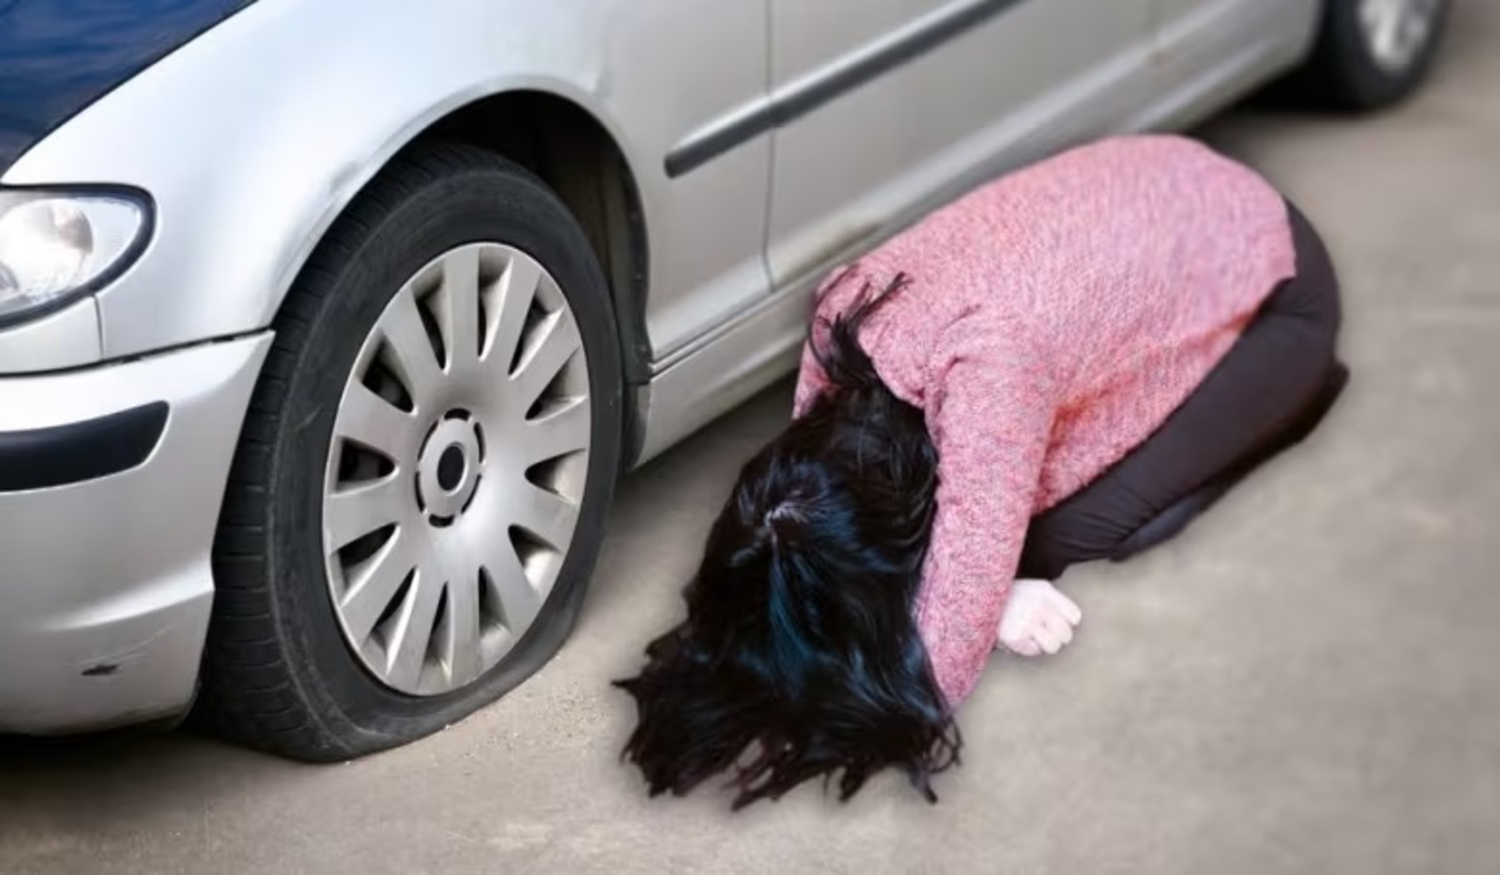 Deflated - a woman on her face near a car with a flat tire